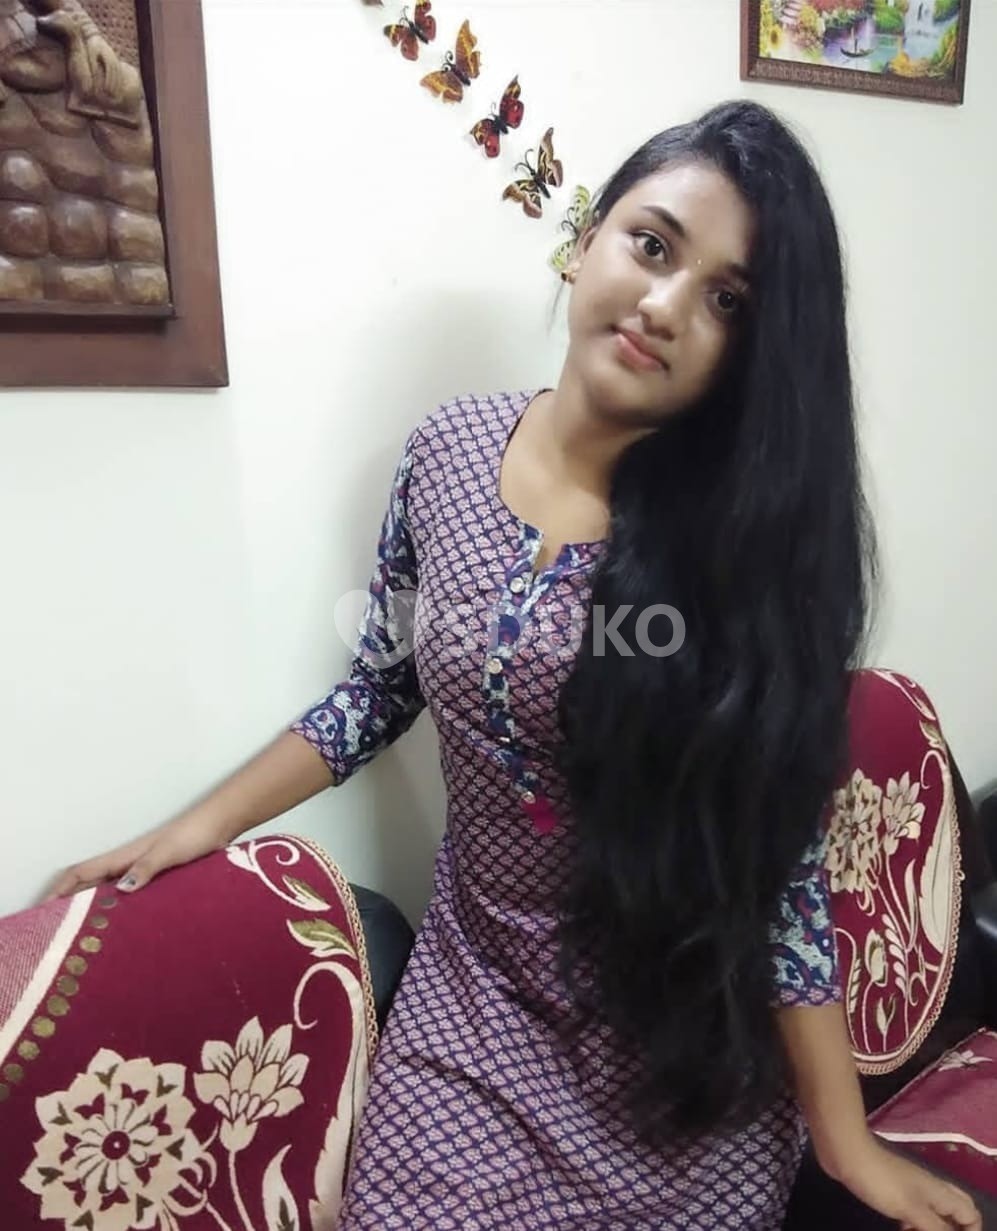 MADURAI CALL GIRL IN AUNTY AND COLLEGE GIRL BOTH OF AVAILABLE